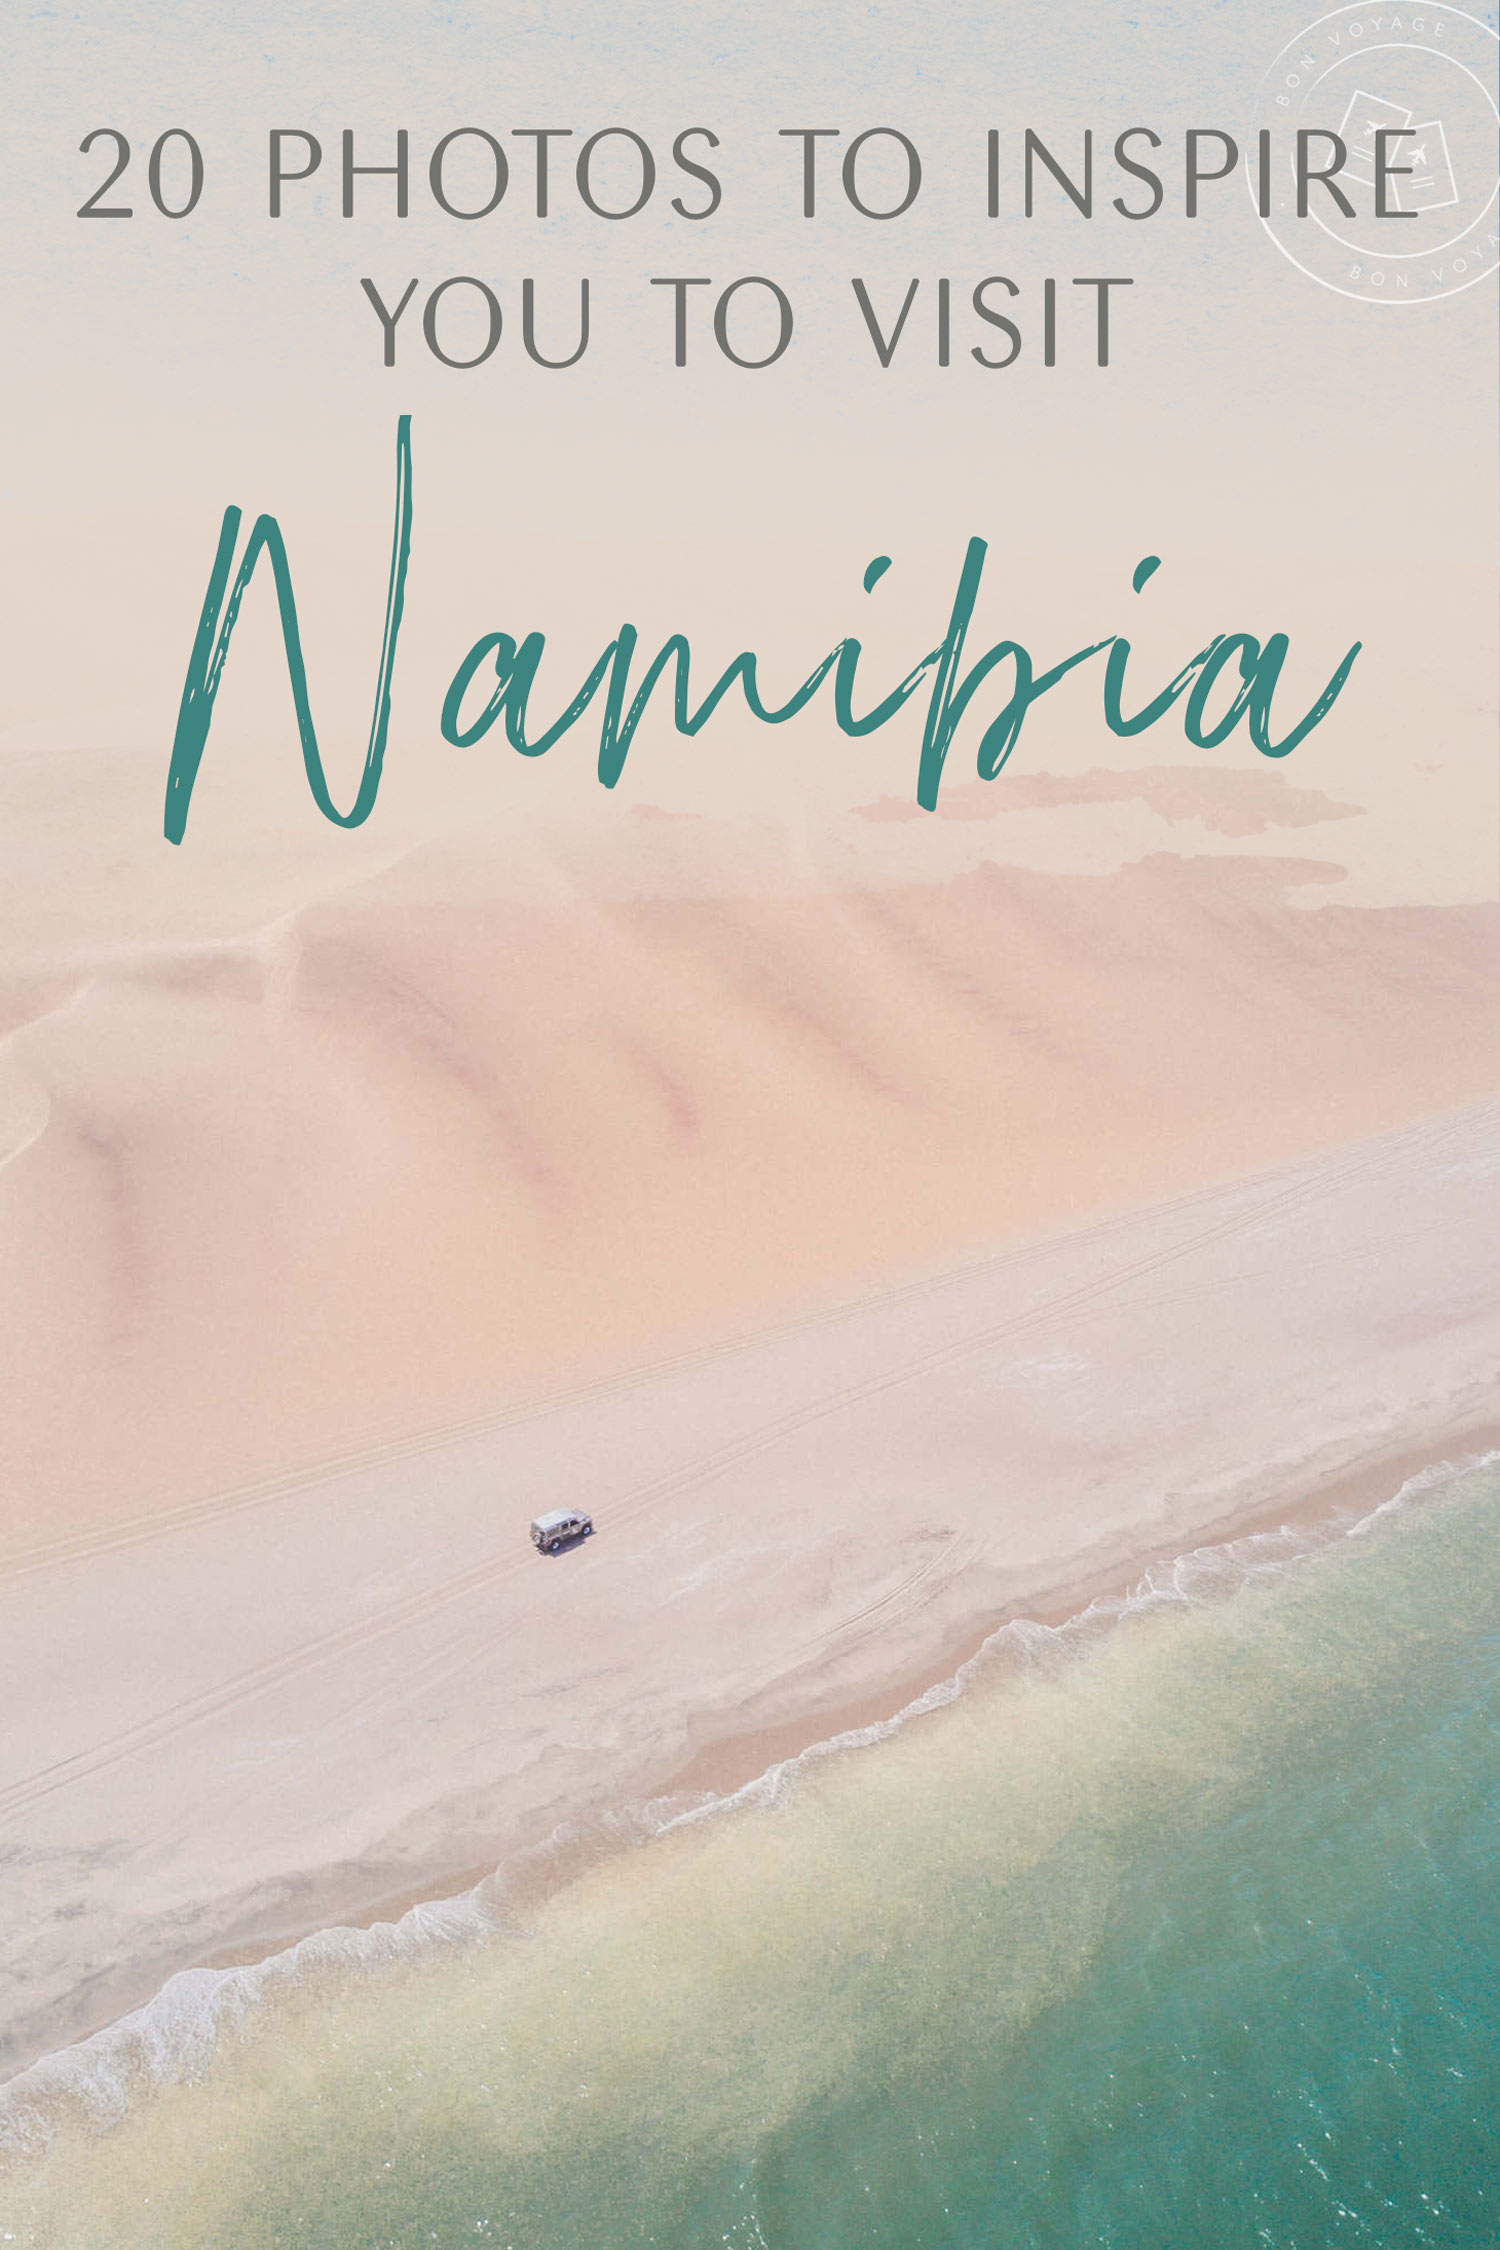 20 photos to inspire you to visit Namibia